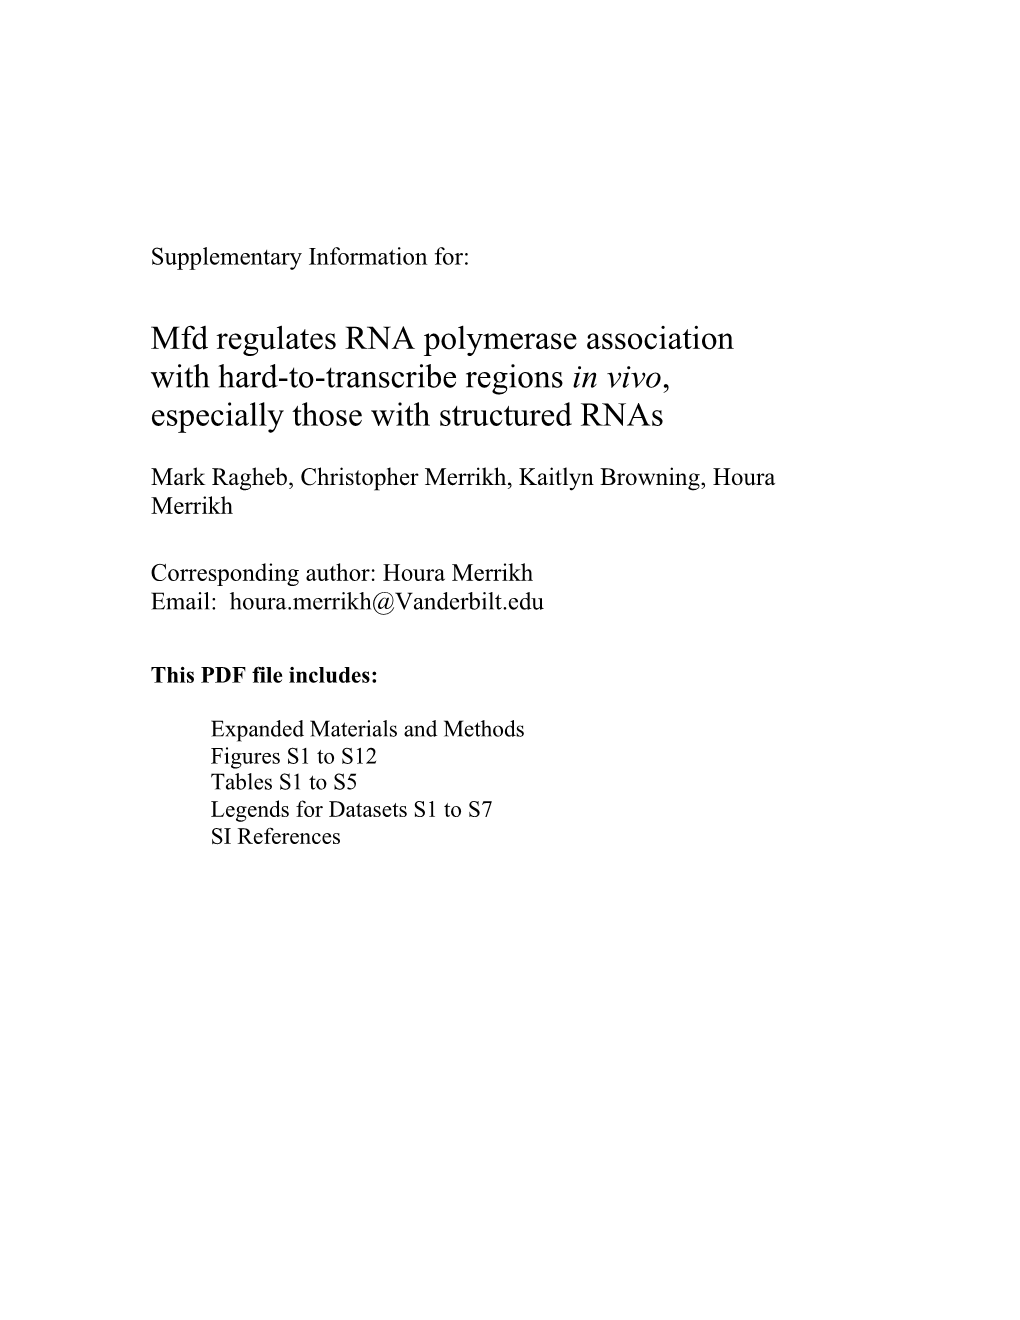 Mfd Regulates RNA Polymerase Association with Hard-To-Transcribe Regions in Vivo, Especially Those with Structured Rnas